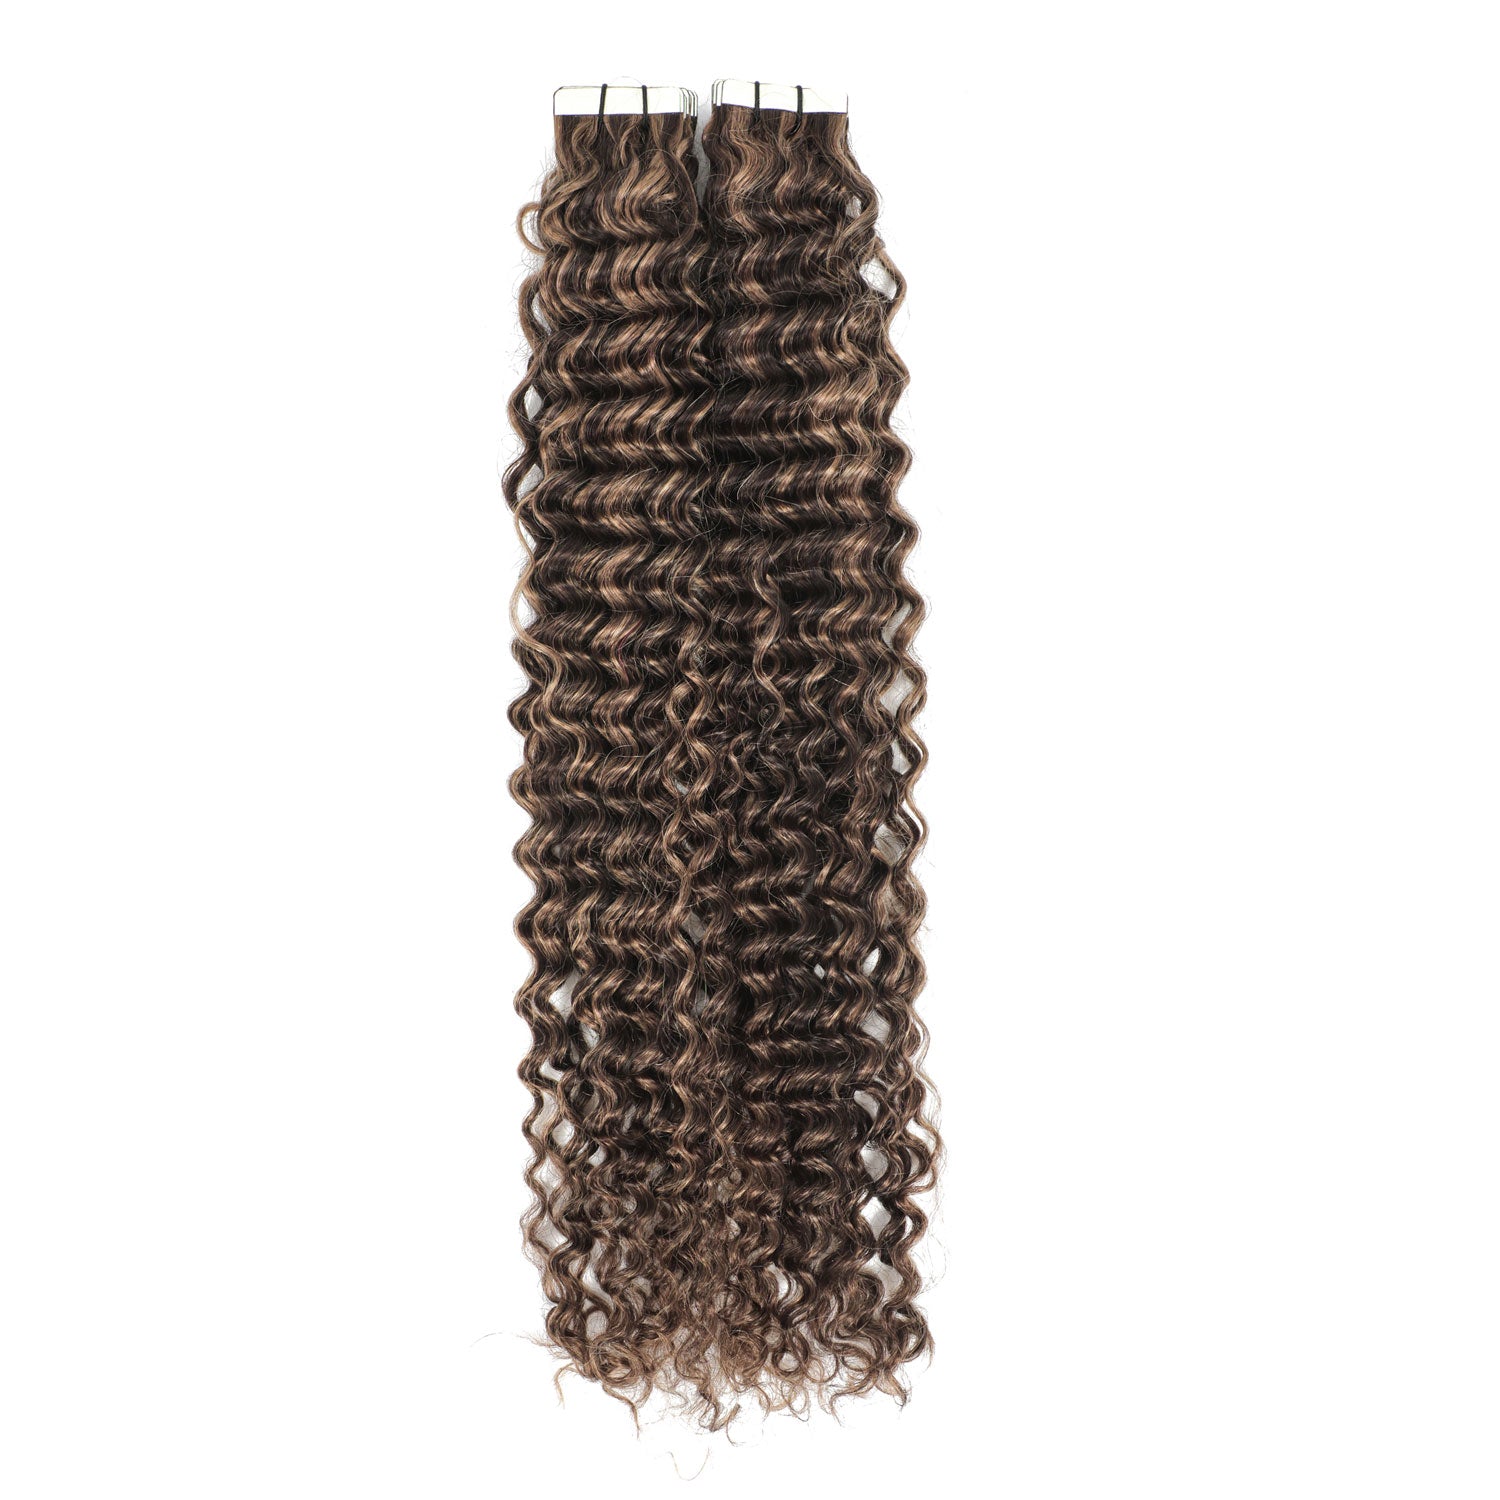 Curly Tape Human Hair Extensions  3c #2/16 Dark Brown & Natural Blonde Highlights